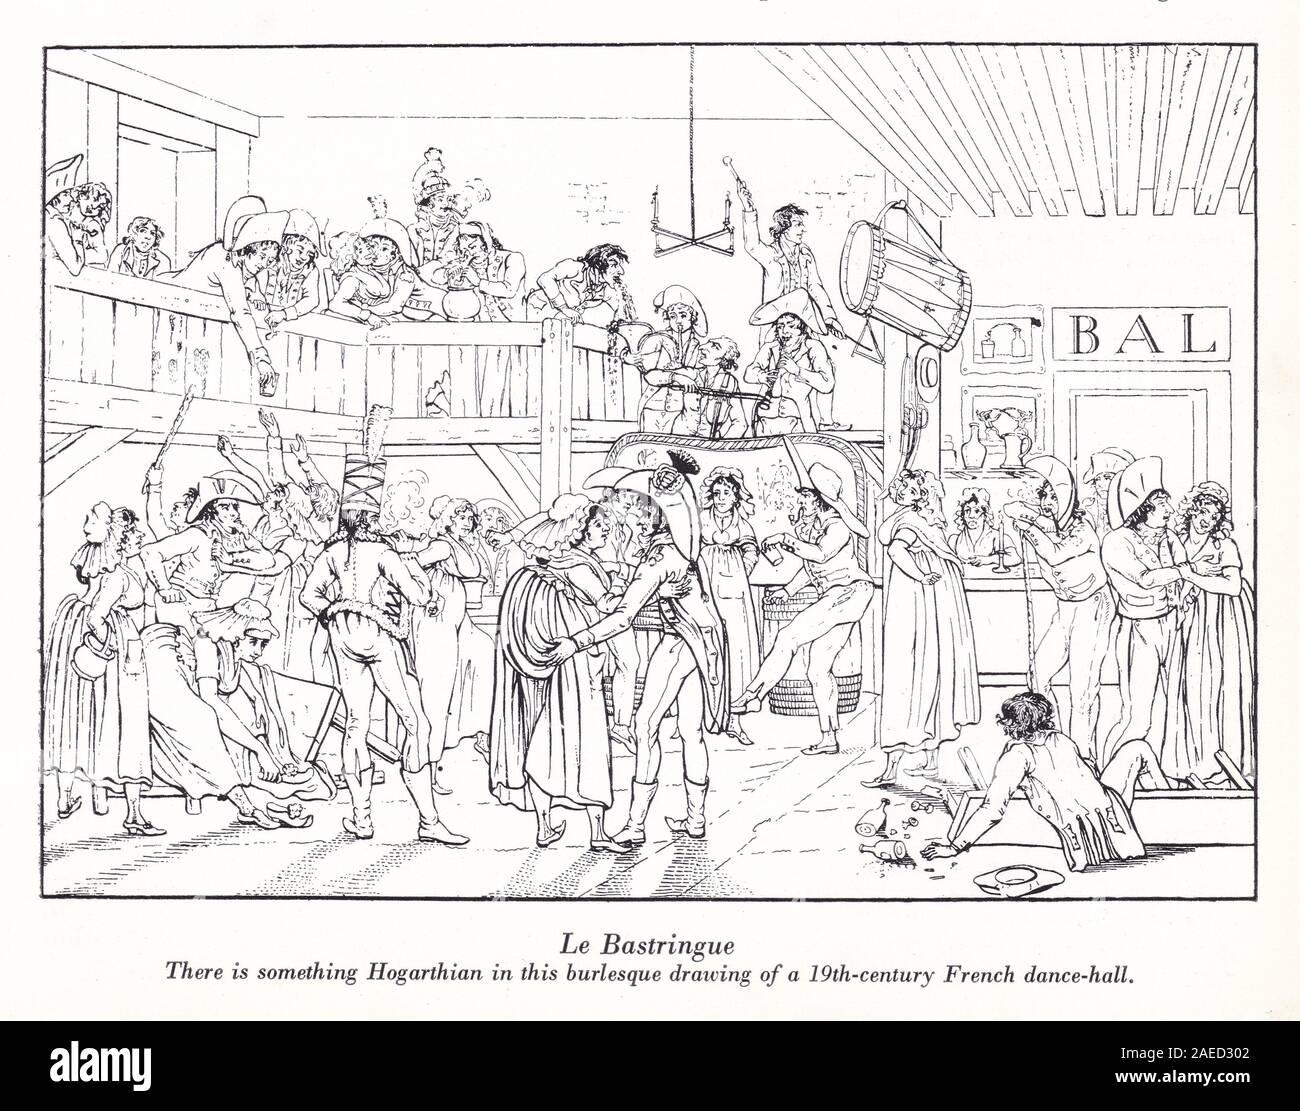 'Le Bastringue' - Burlesque drawing of a 19th century French dance hall. Stock Photo